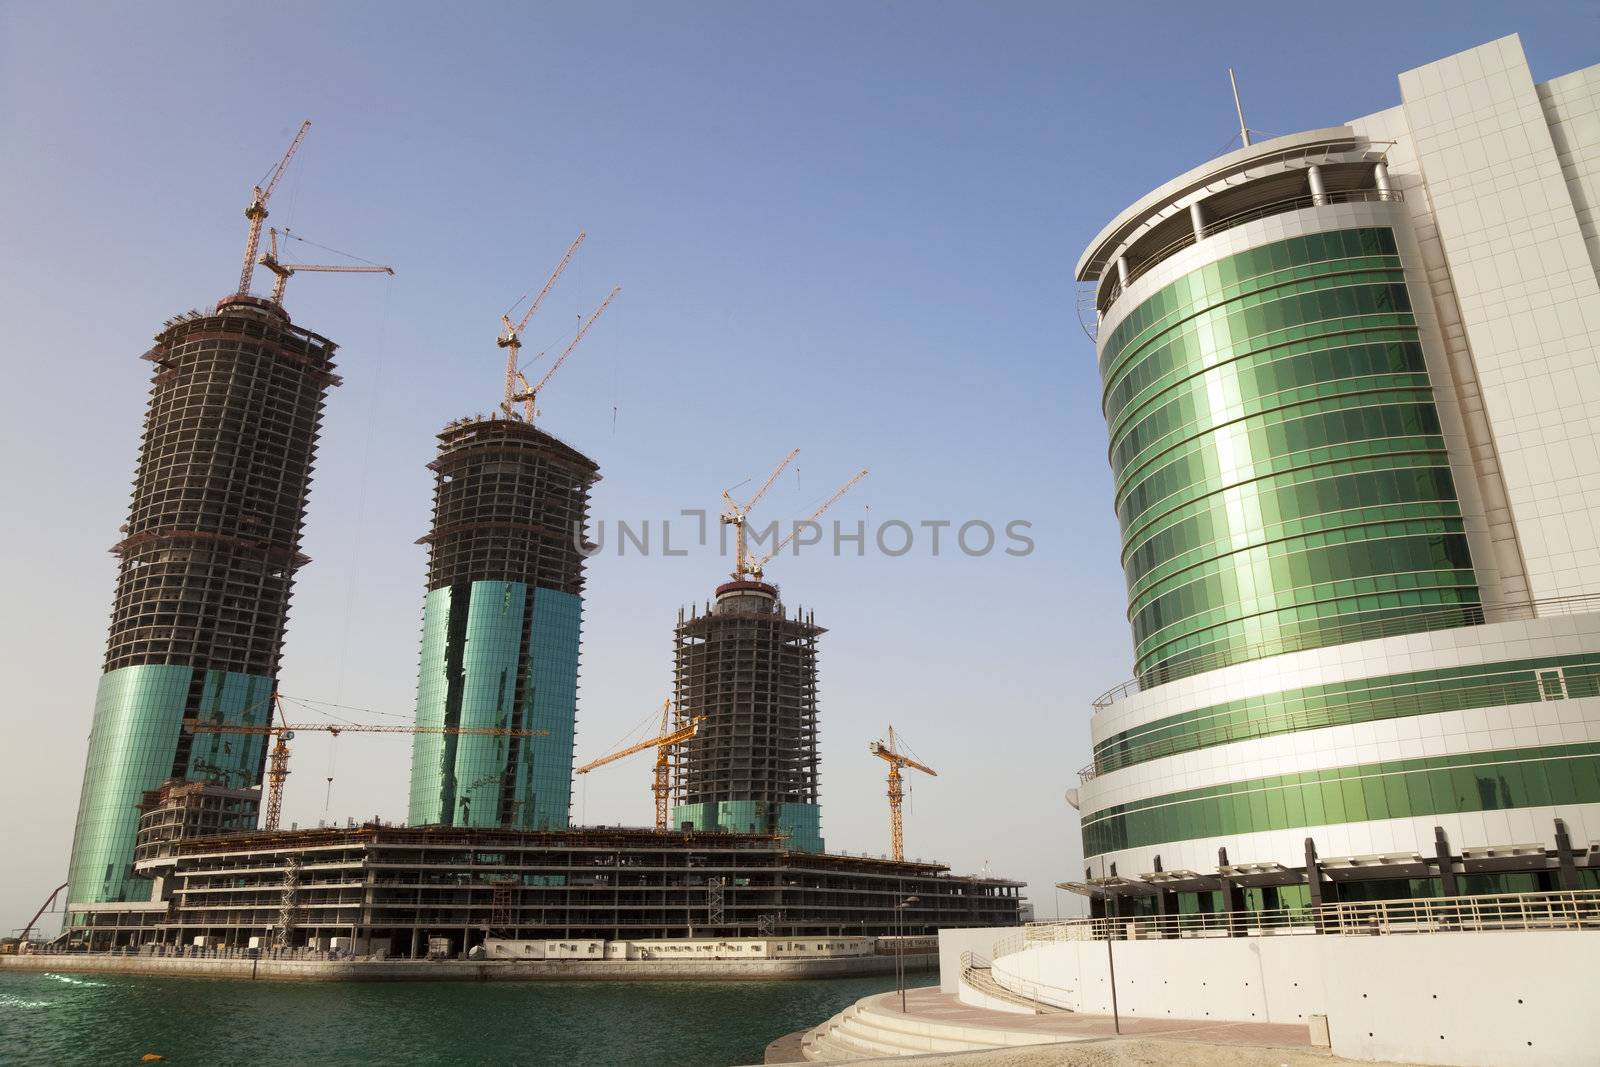 Image of buildings under construction at Manama, Bahrain.